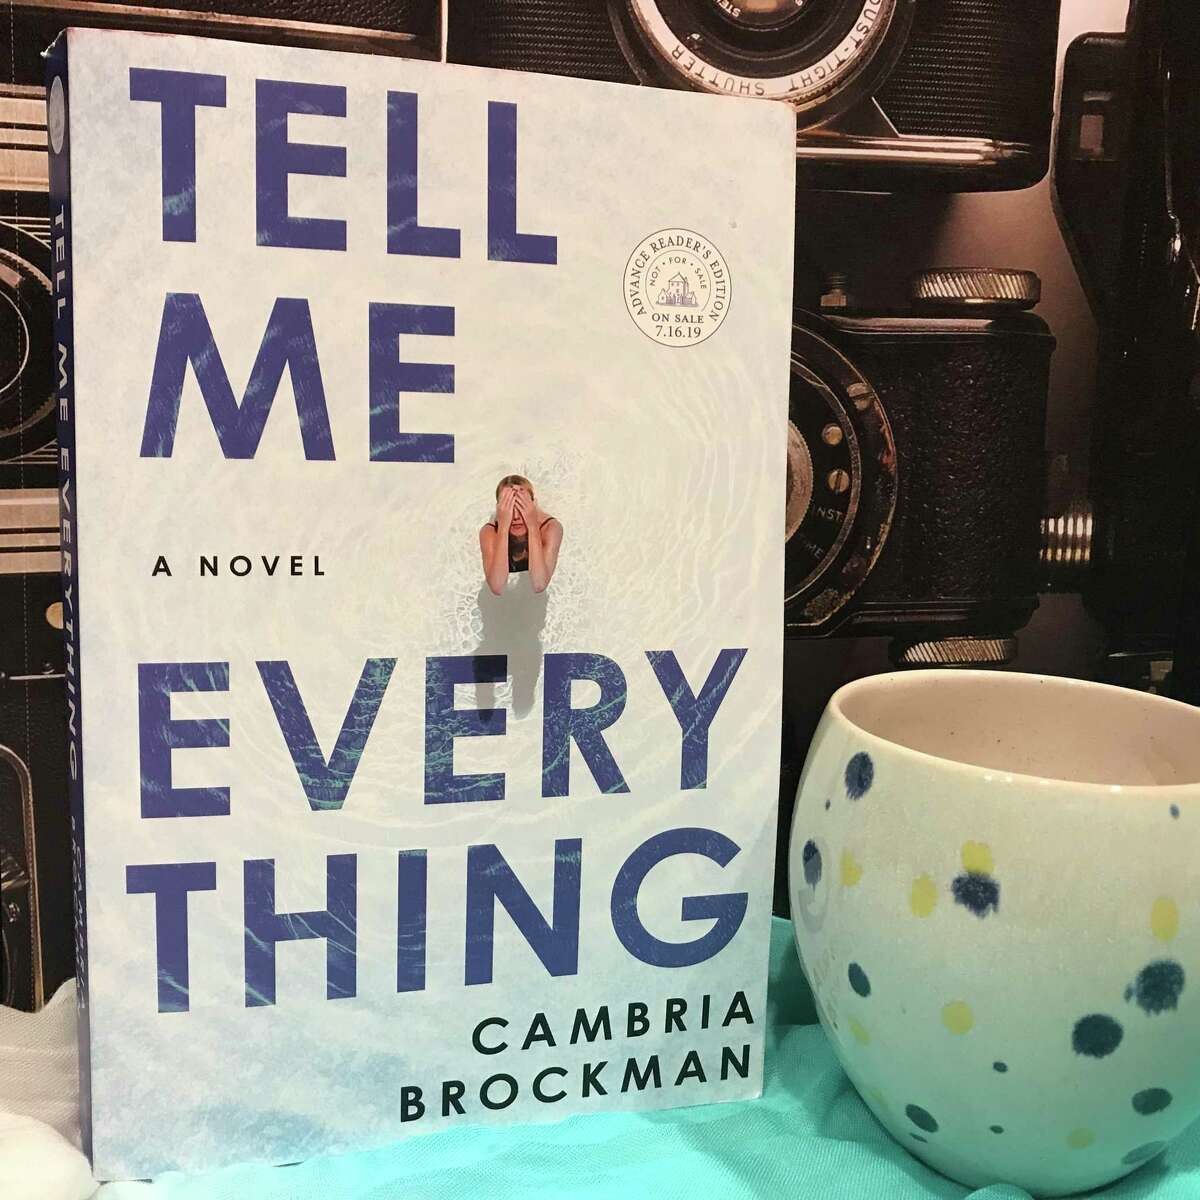 Cambria Brockman’s debut novel “Tell Me Everything” features a shocking twist.